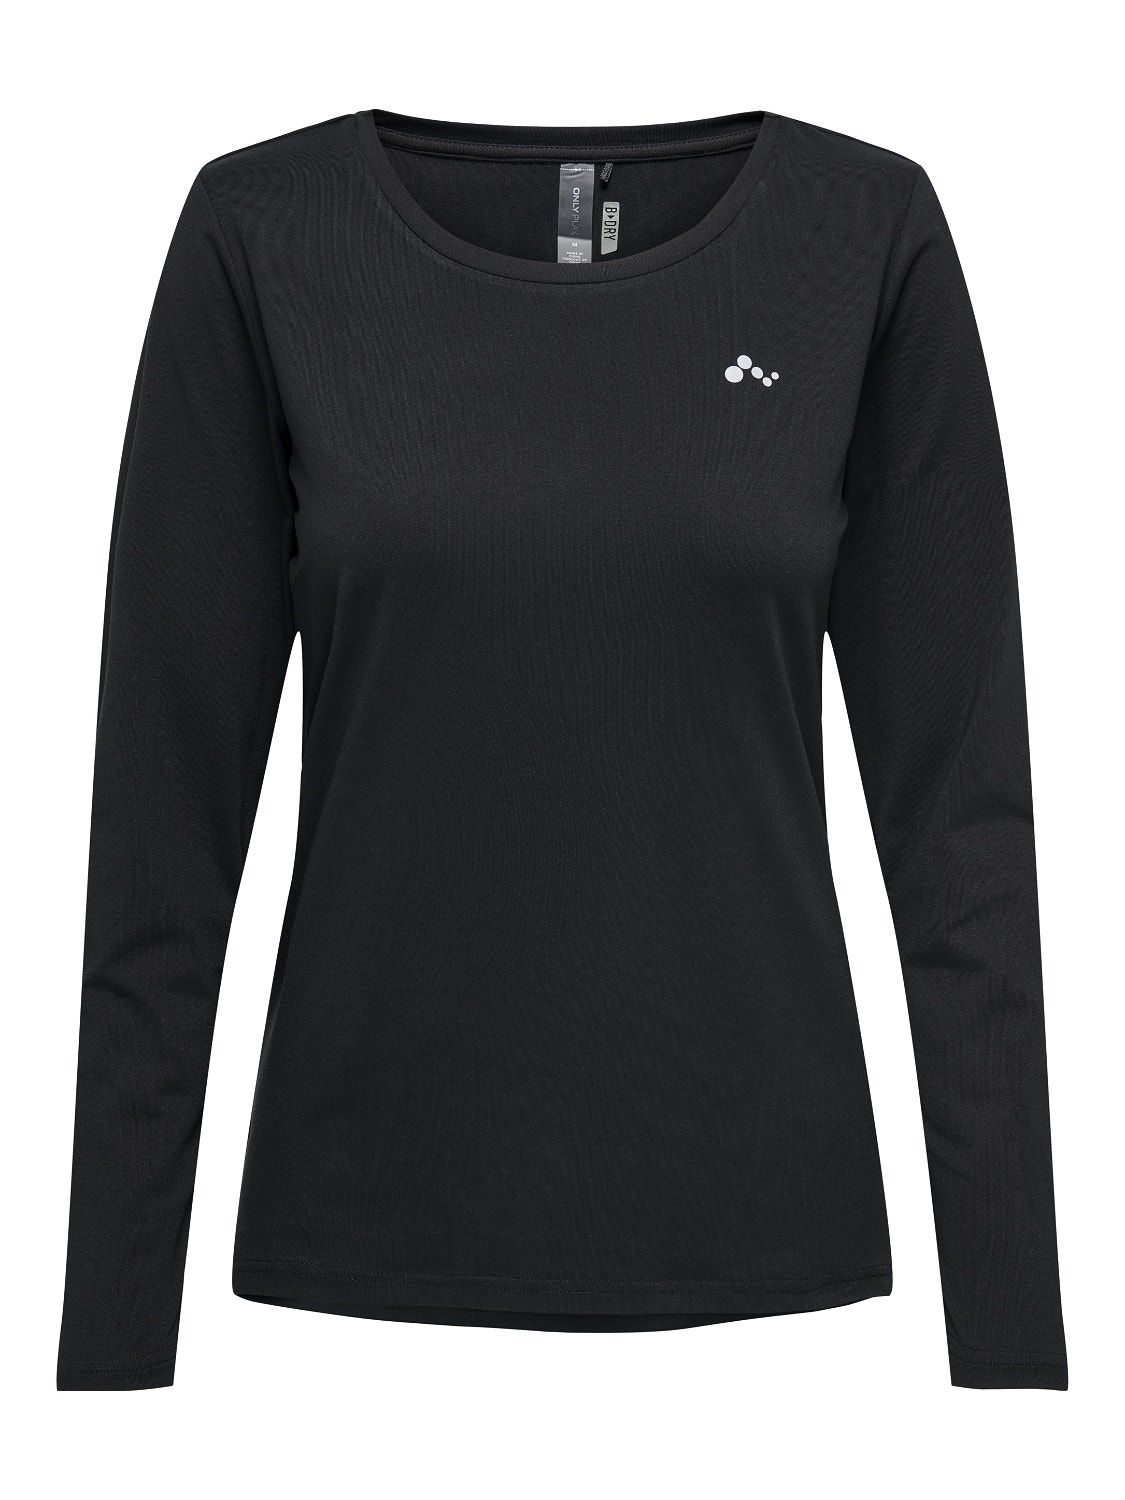 ONLY Long sleeved Sports top -Black - 15135149